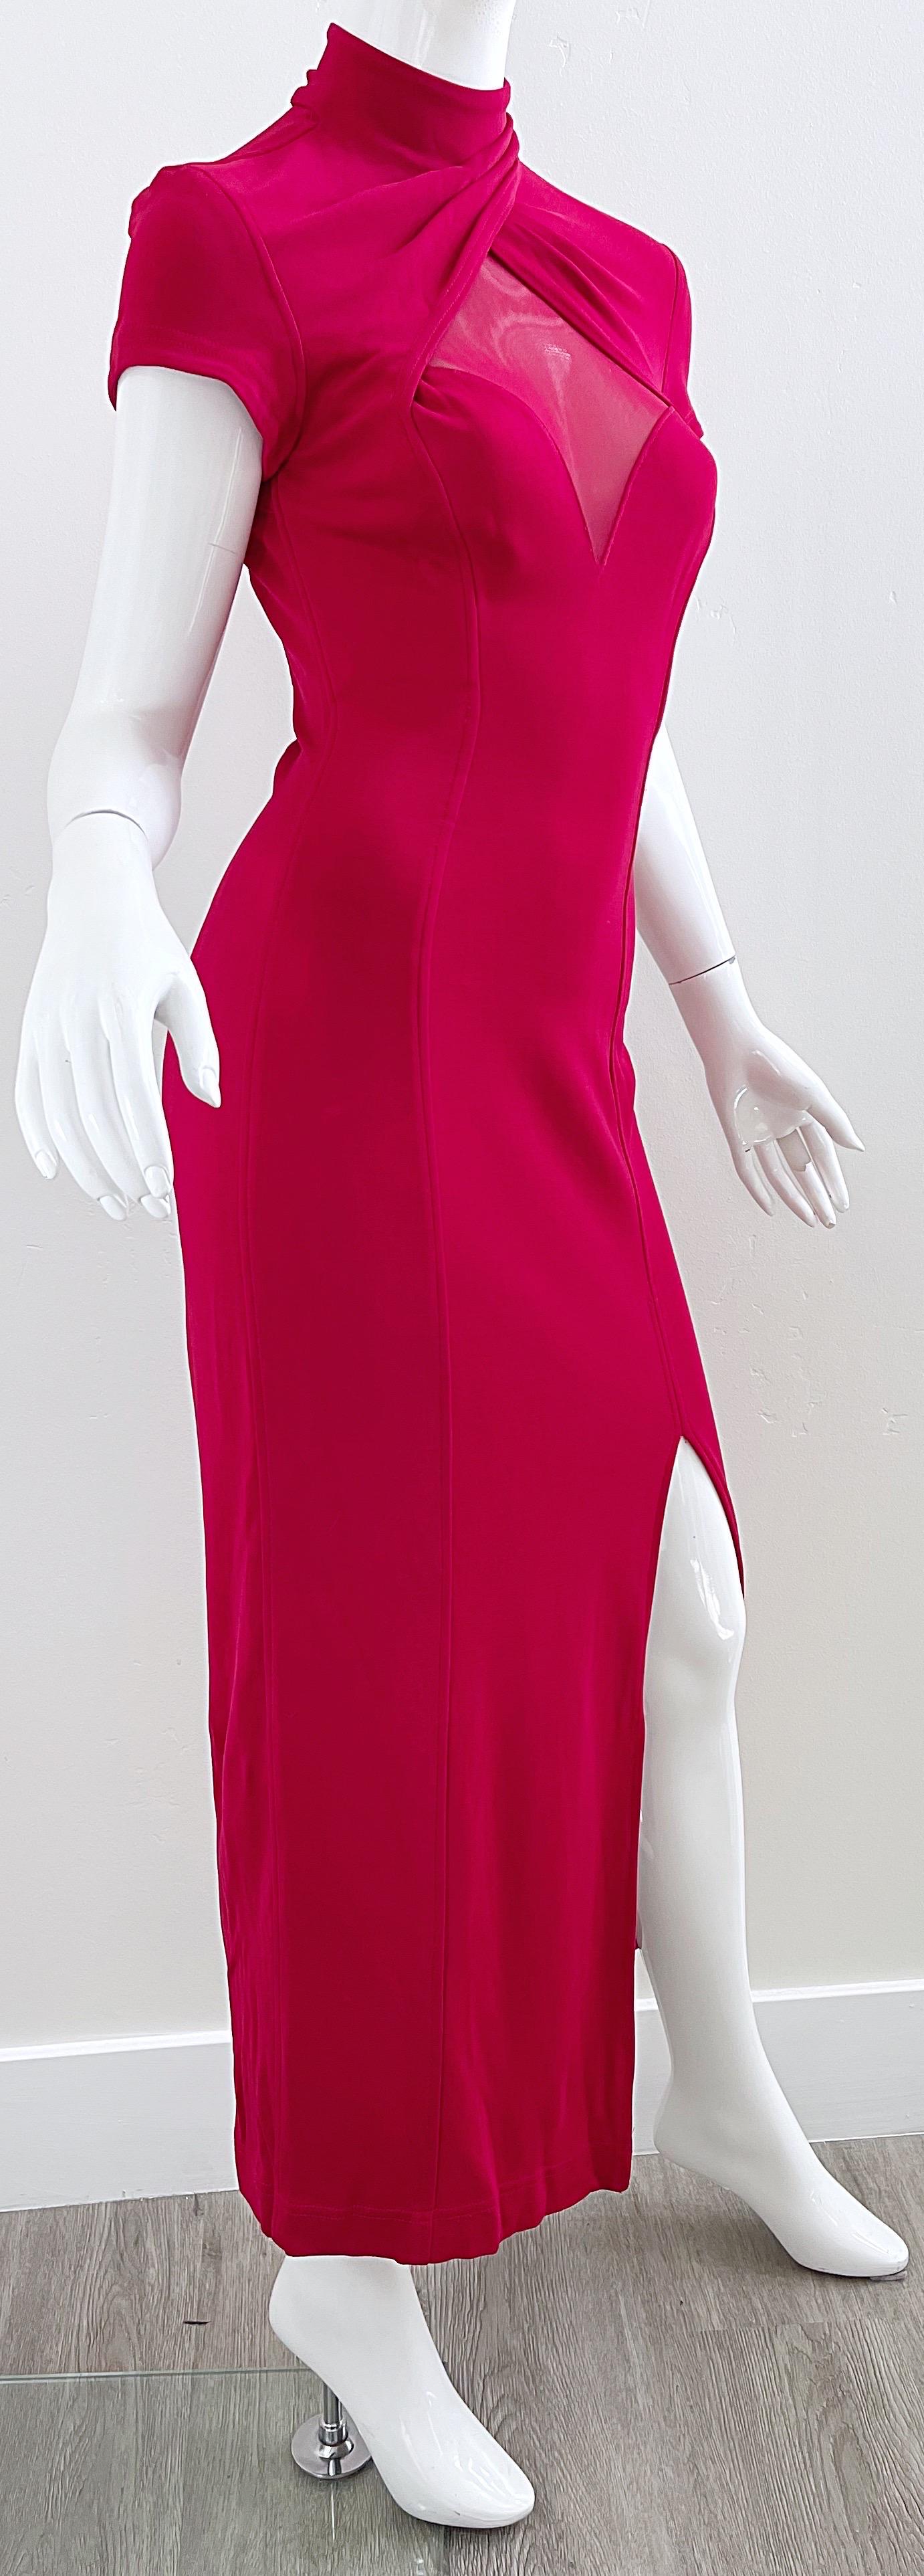 1990s Tadashi Lipstick Red Sexy Cut-Out Bodycon Vintage 90s Jersey Evening Dress For Sale 4